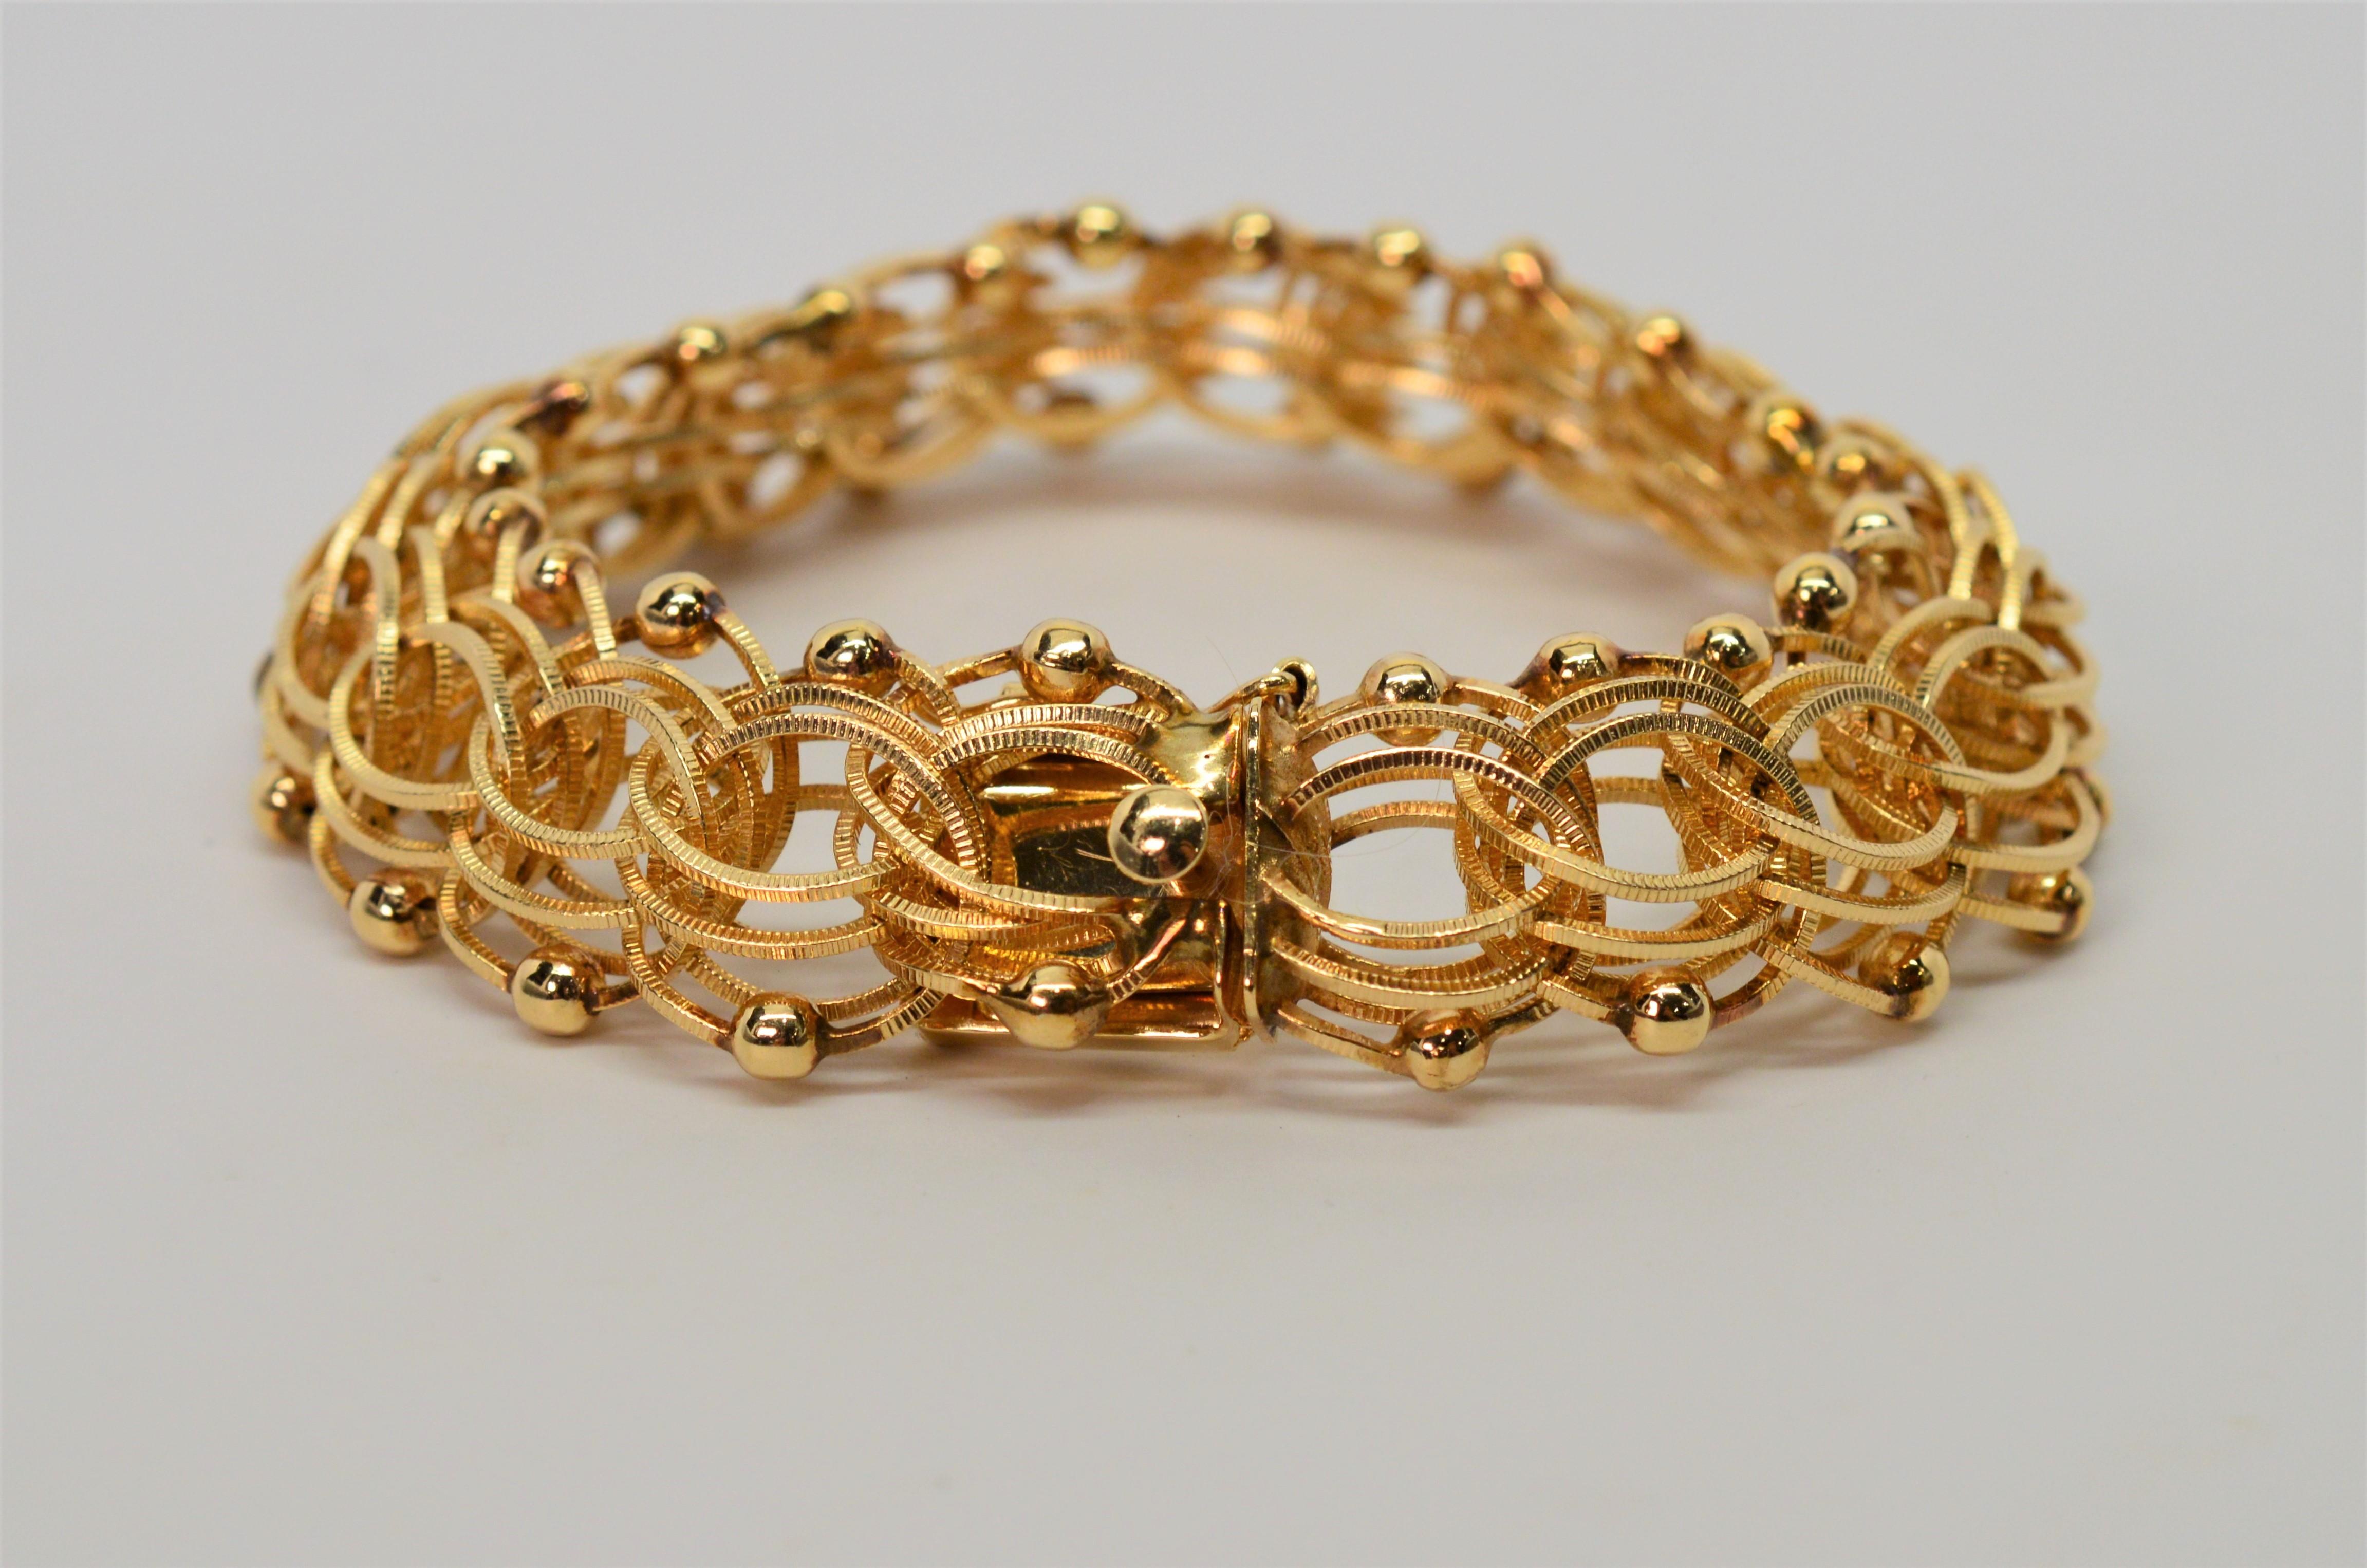 Finely crafted circa 1950's, this eight inch bracelet made of fourteen karat 14K yellow gold is constructed of uniquely intertwined textured center chain links accented by a border of bright gold polished beads resulting in a beautiful textured